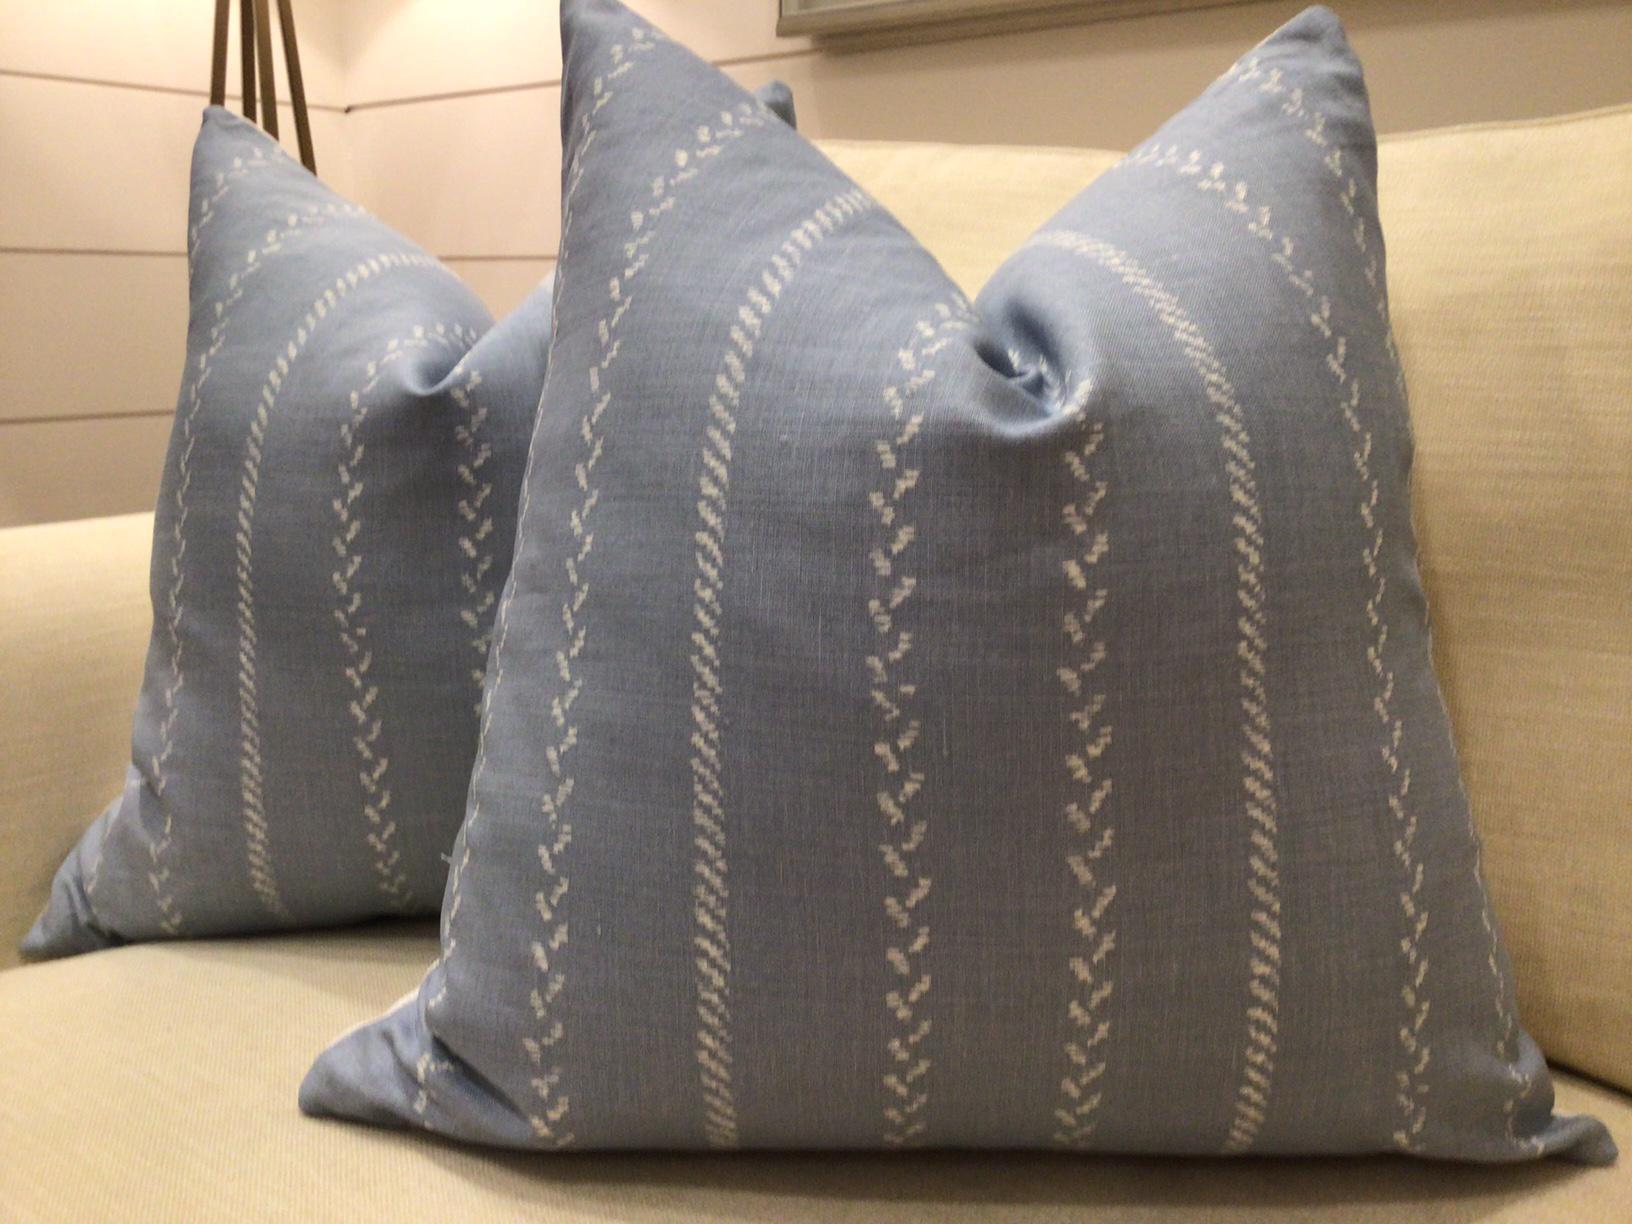 Lee Jofa “Pelham Stripe” from their Blithfield collection is lovely and classic. The pattern features a series of different stripes in soft white on a prairie blue linen background.

Love the tasteful and classy vibe that these would bring to any